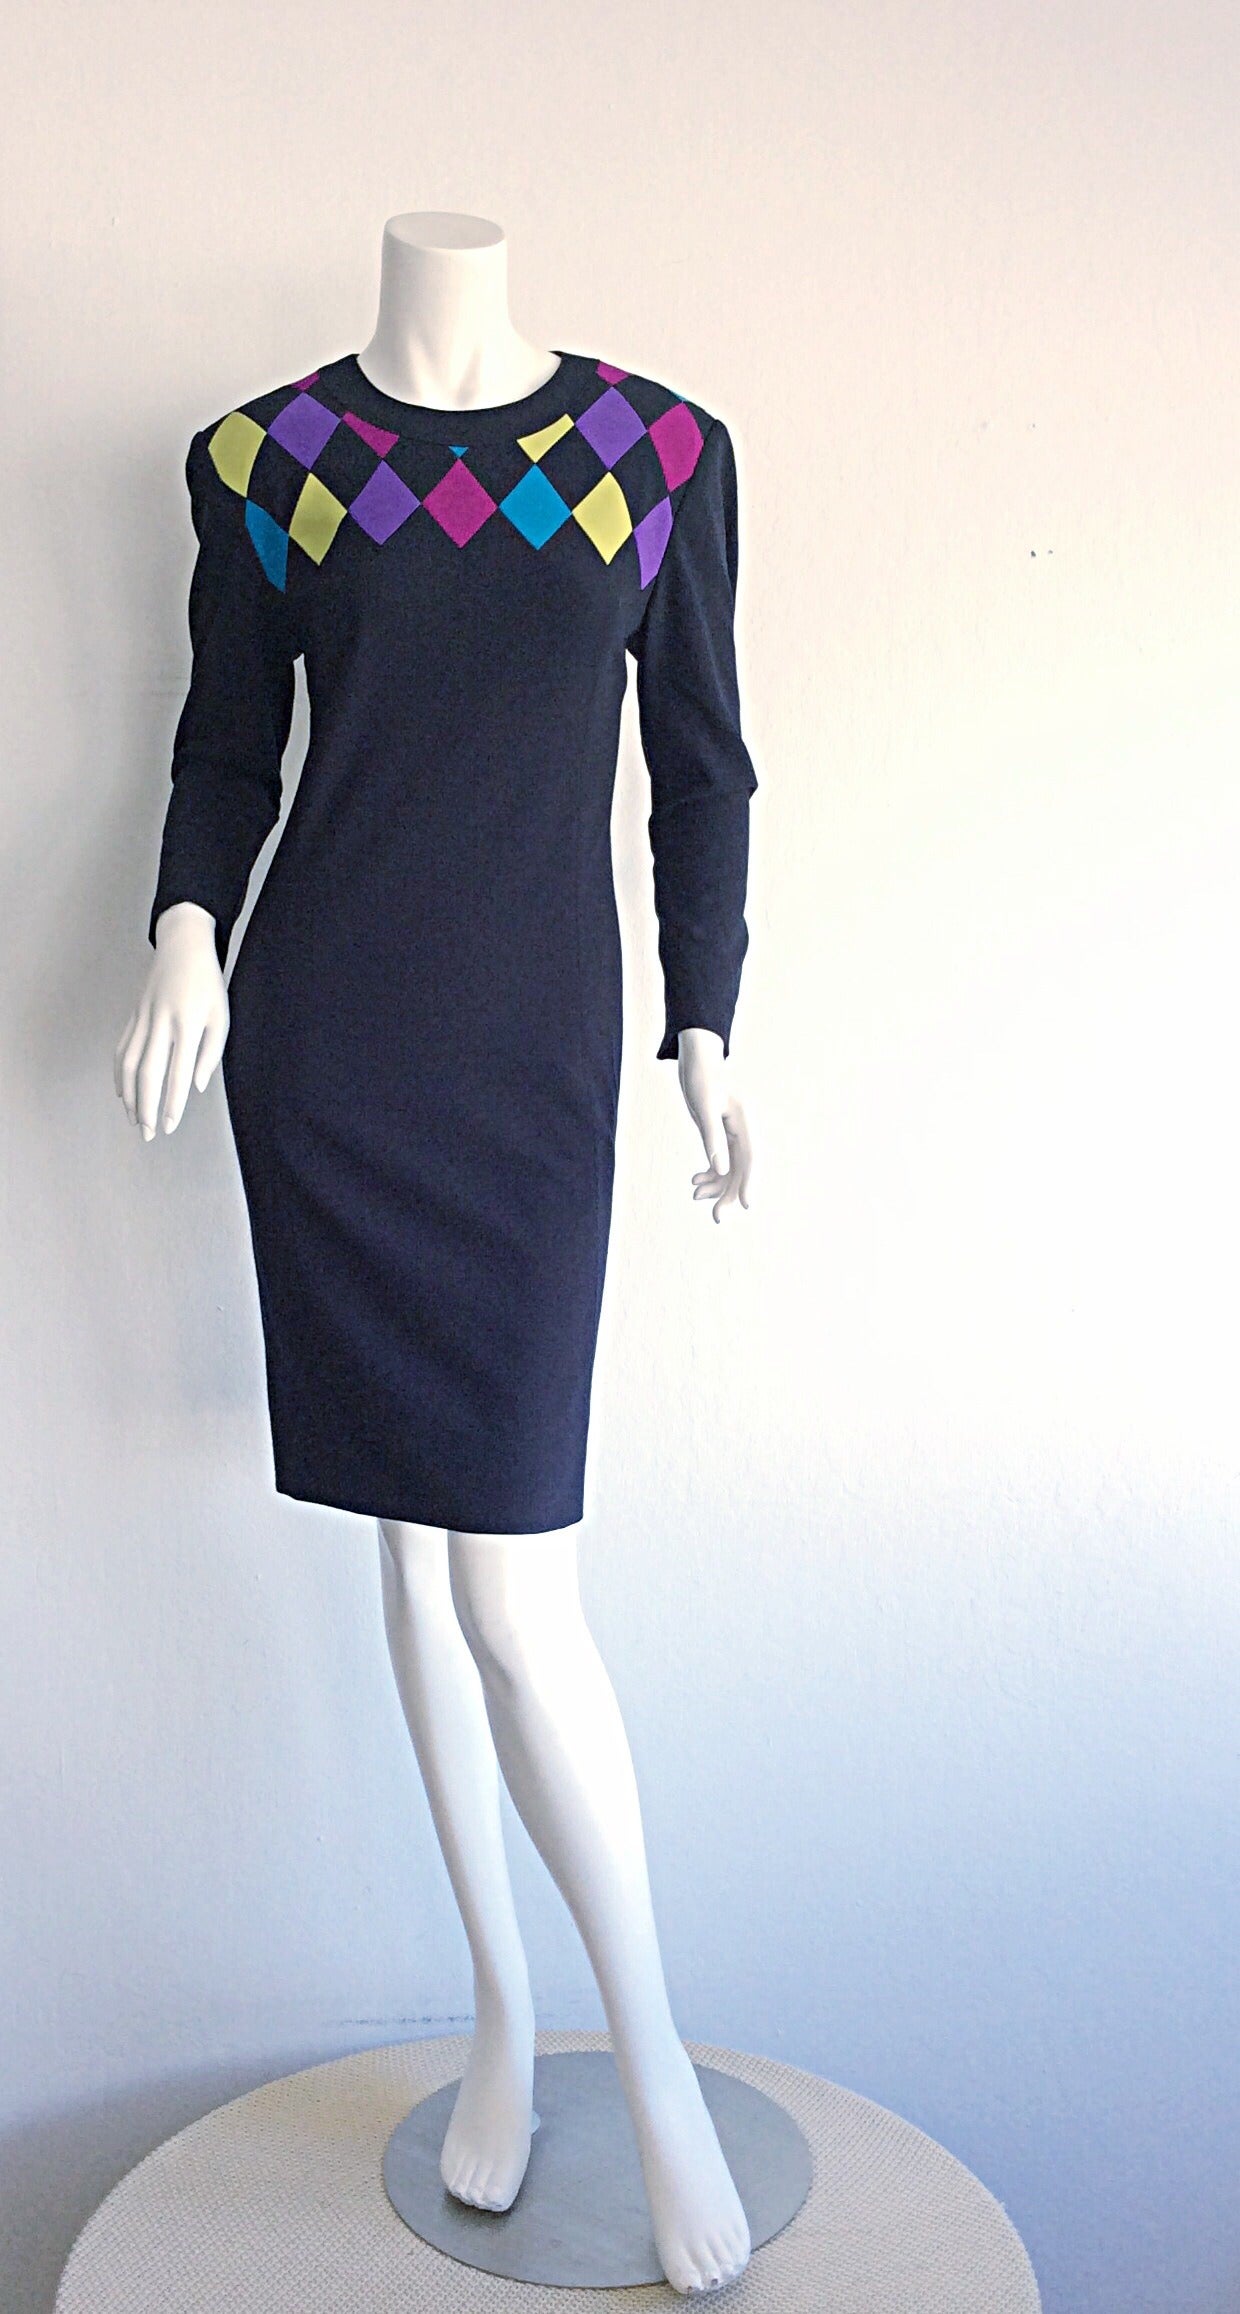 Vintage Louis Feraud Size 4 / 6 Harlequin Geometric Midnight Navy Blue Dress In Excellent Condition For Sale In San Diego, CA